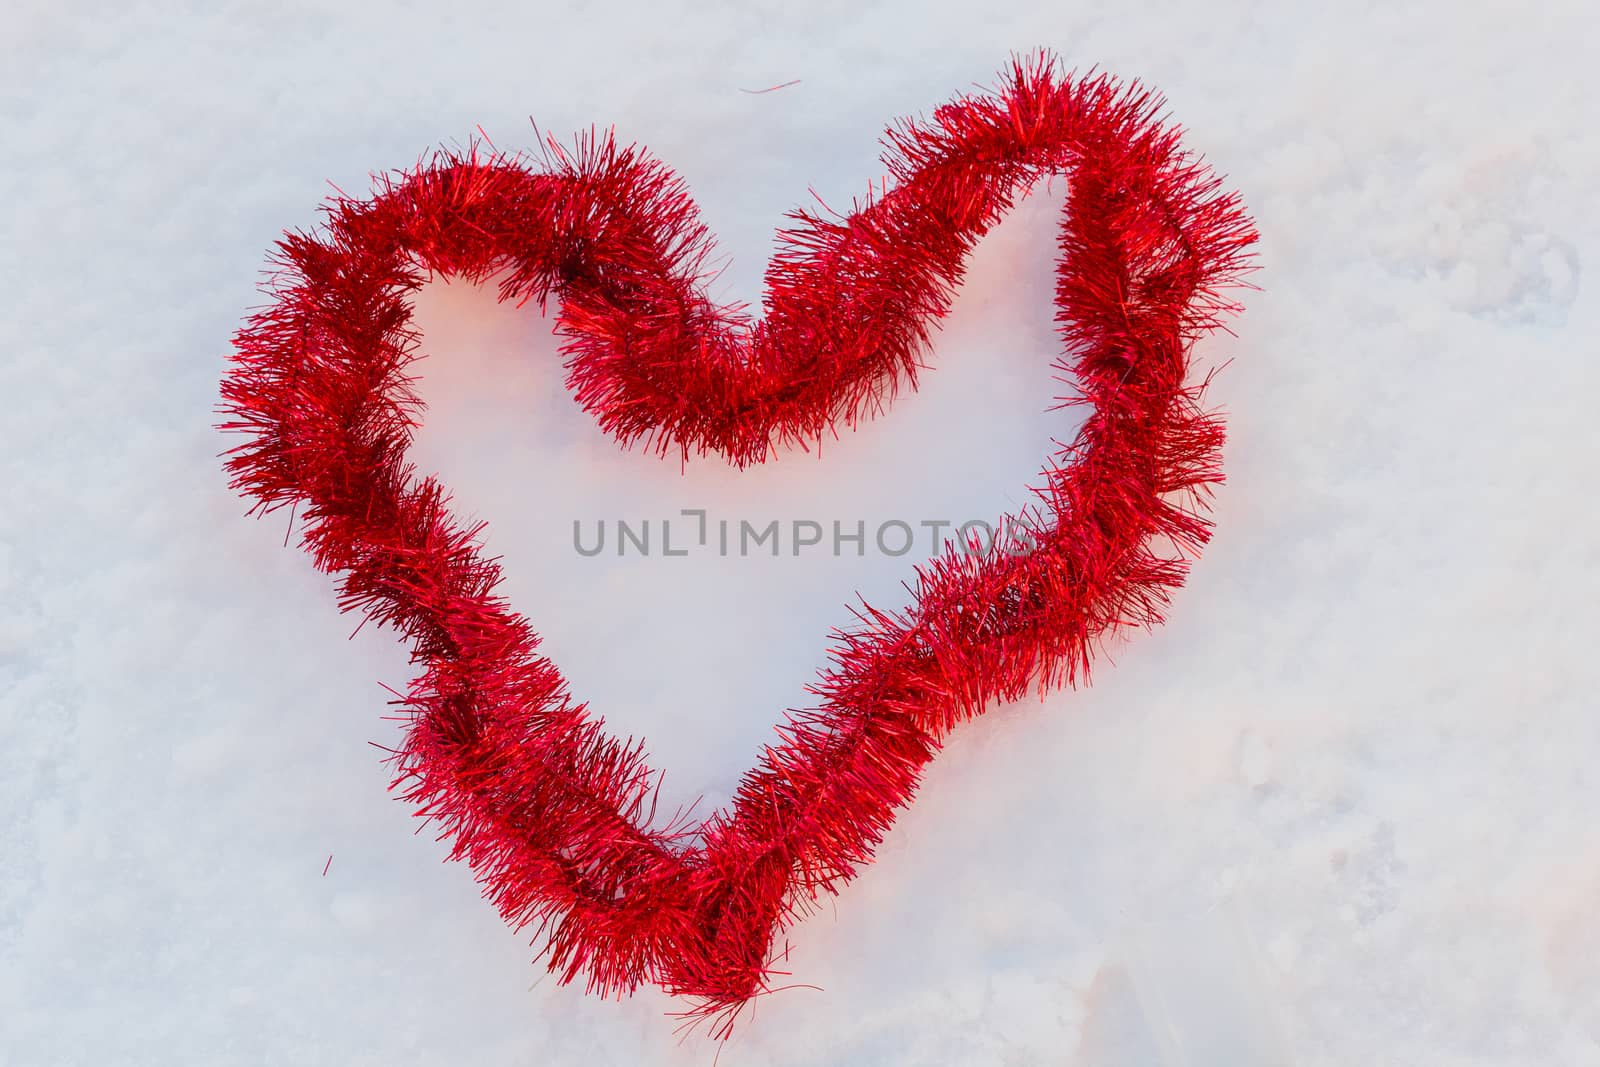 the symbol of love in the snow to remember that Valentine's day is in winter